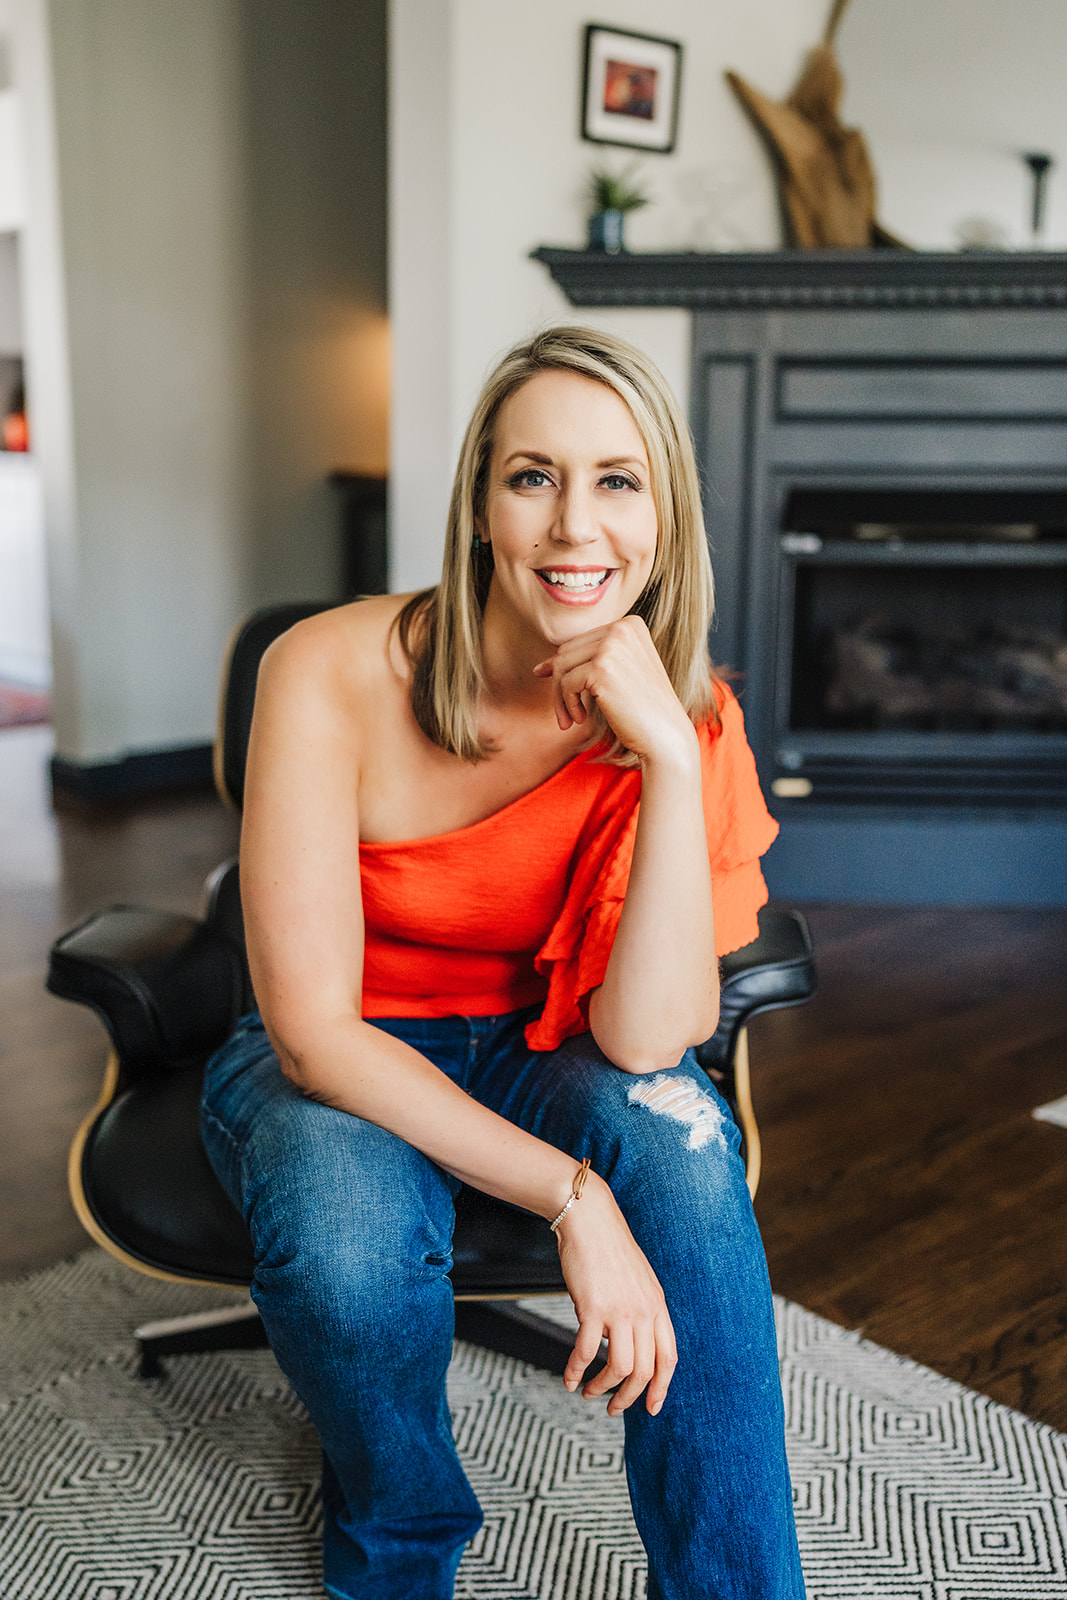 Nicki Krawczyk, founder of Nicki K Media, sits in a black swivel chair in jeans and a one-shoulder orange top